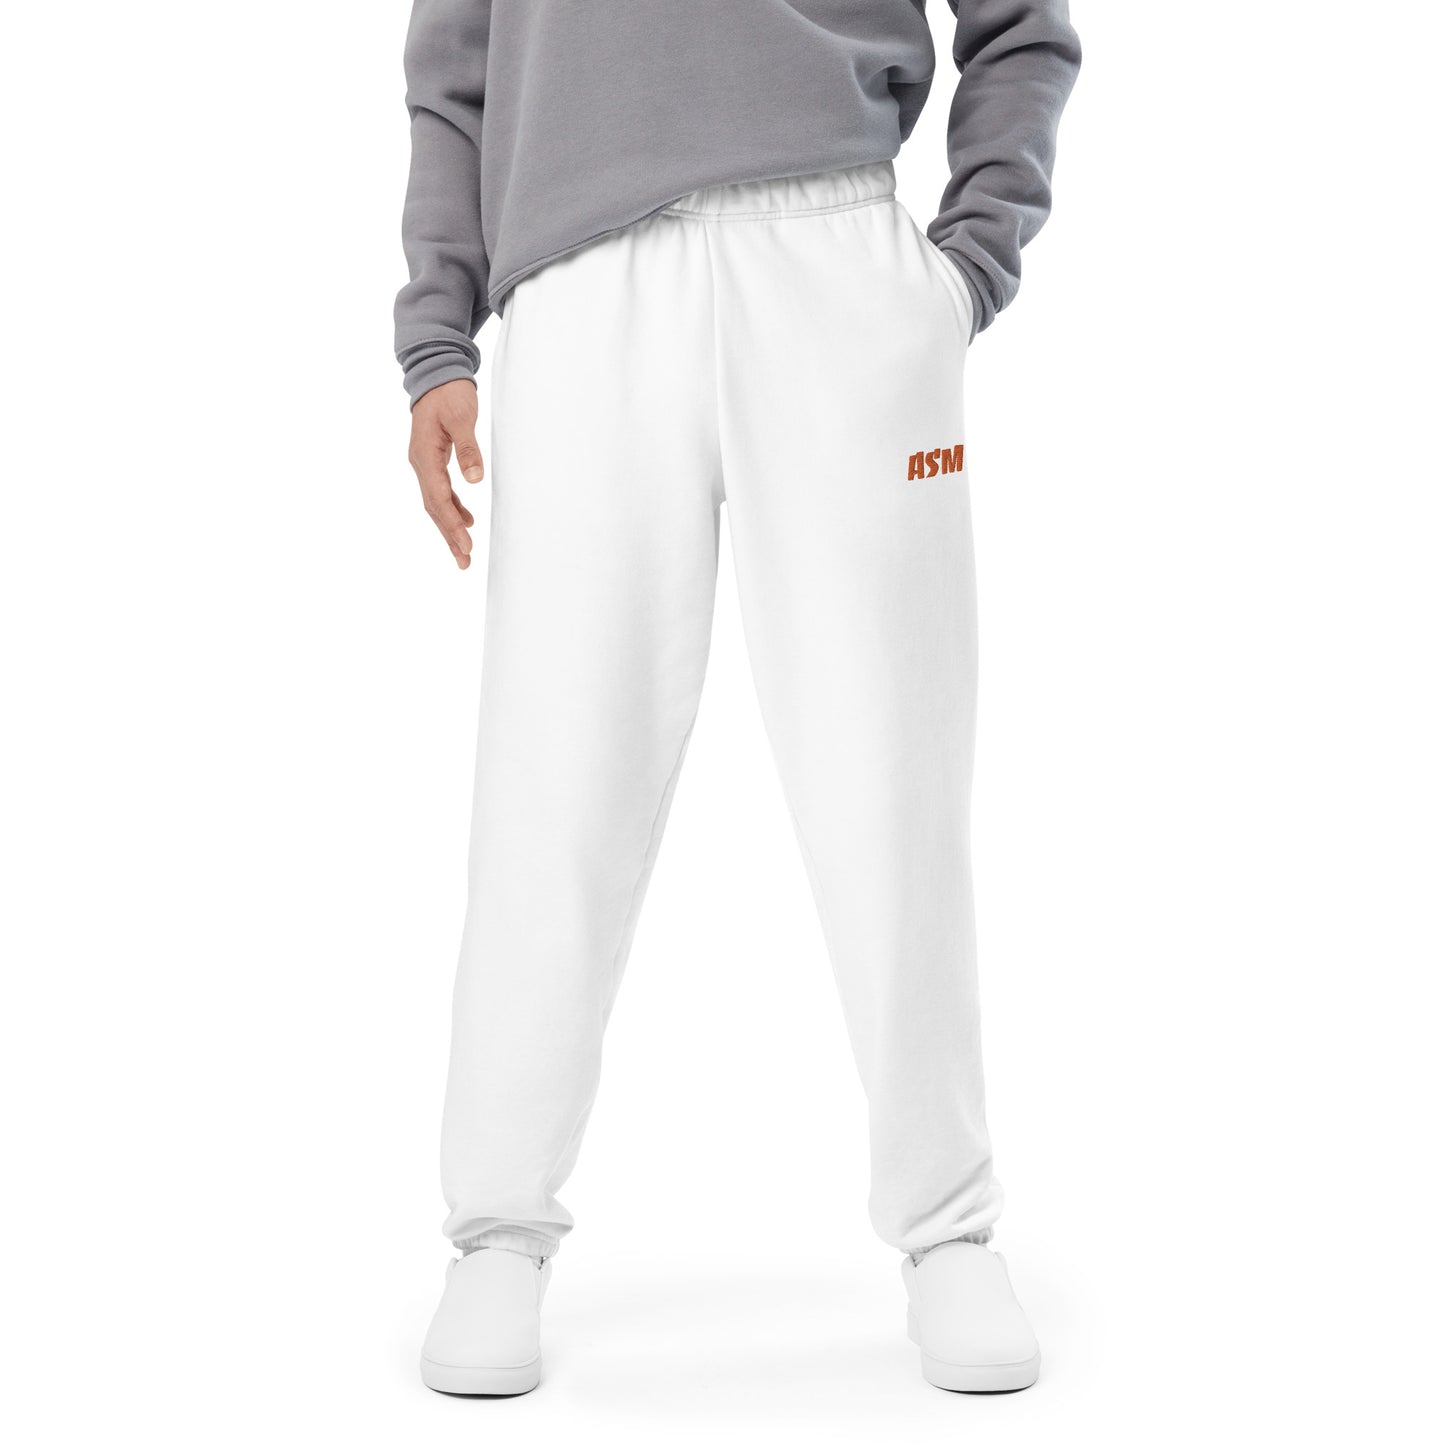 Comfort Sweatpants "ASM" (Only East Asia)